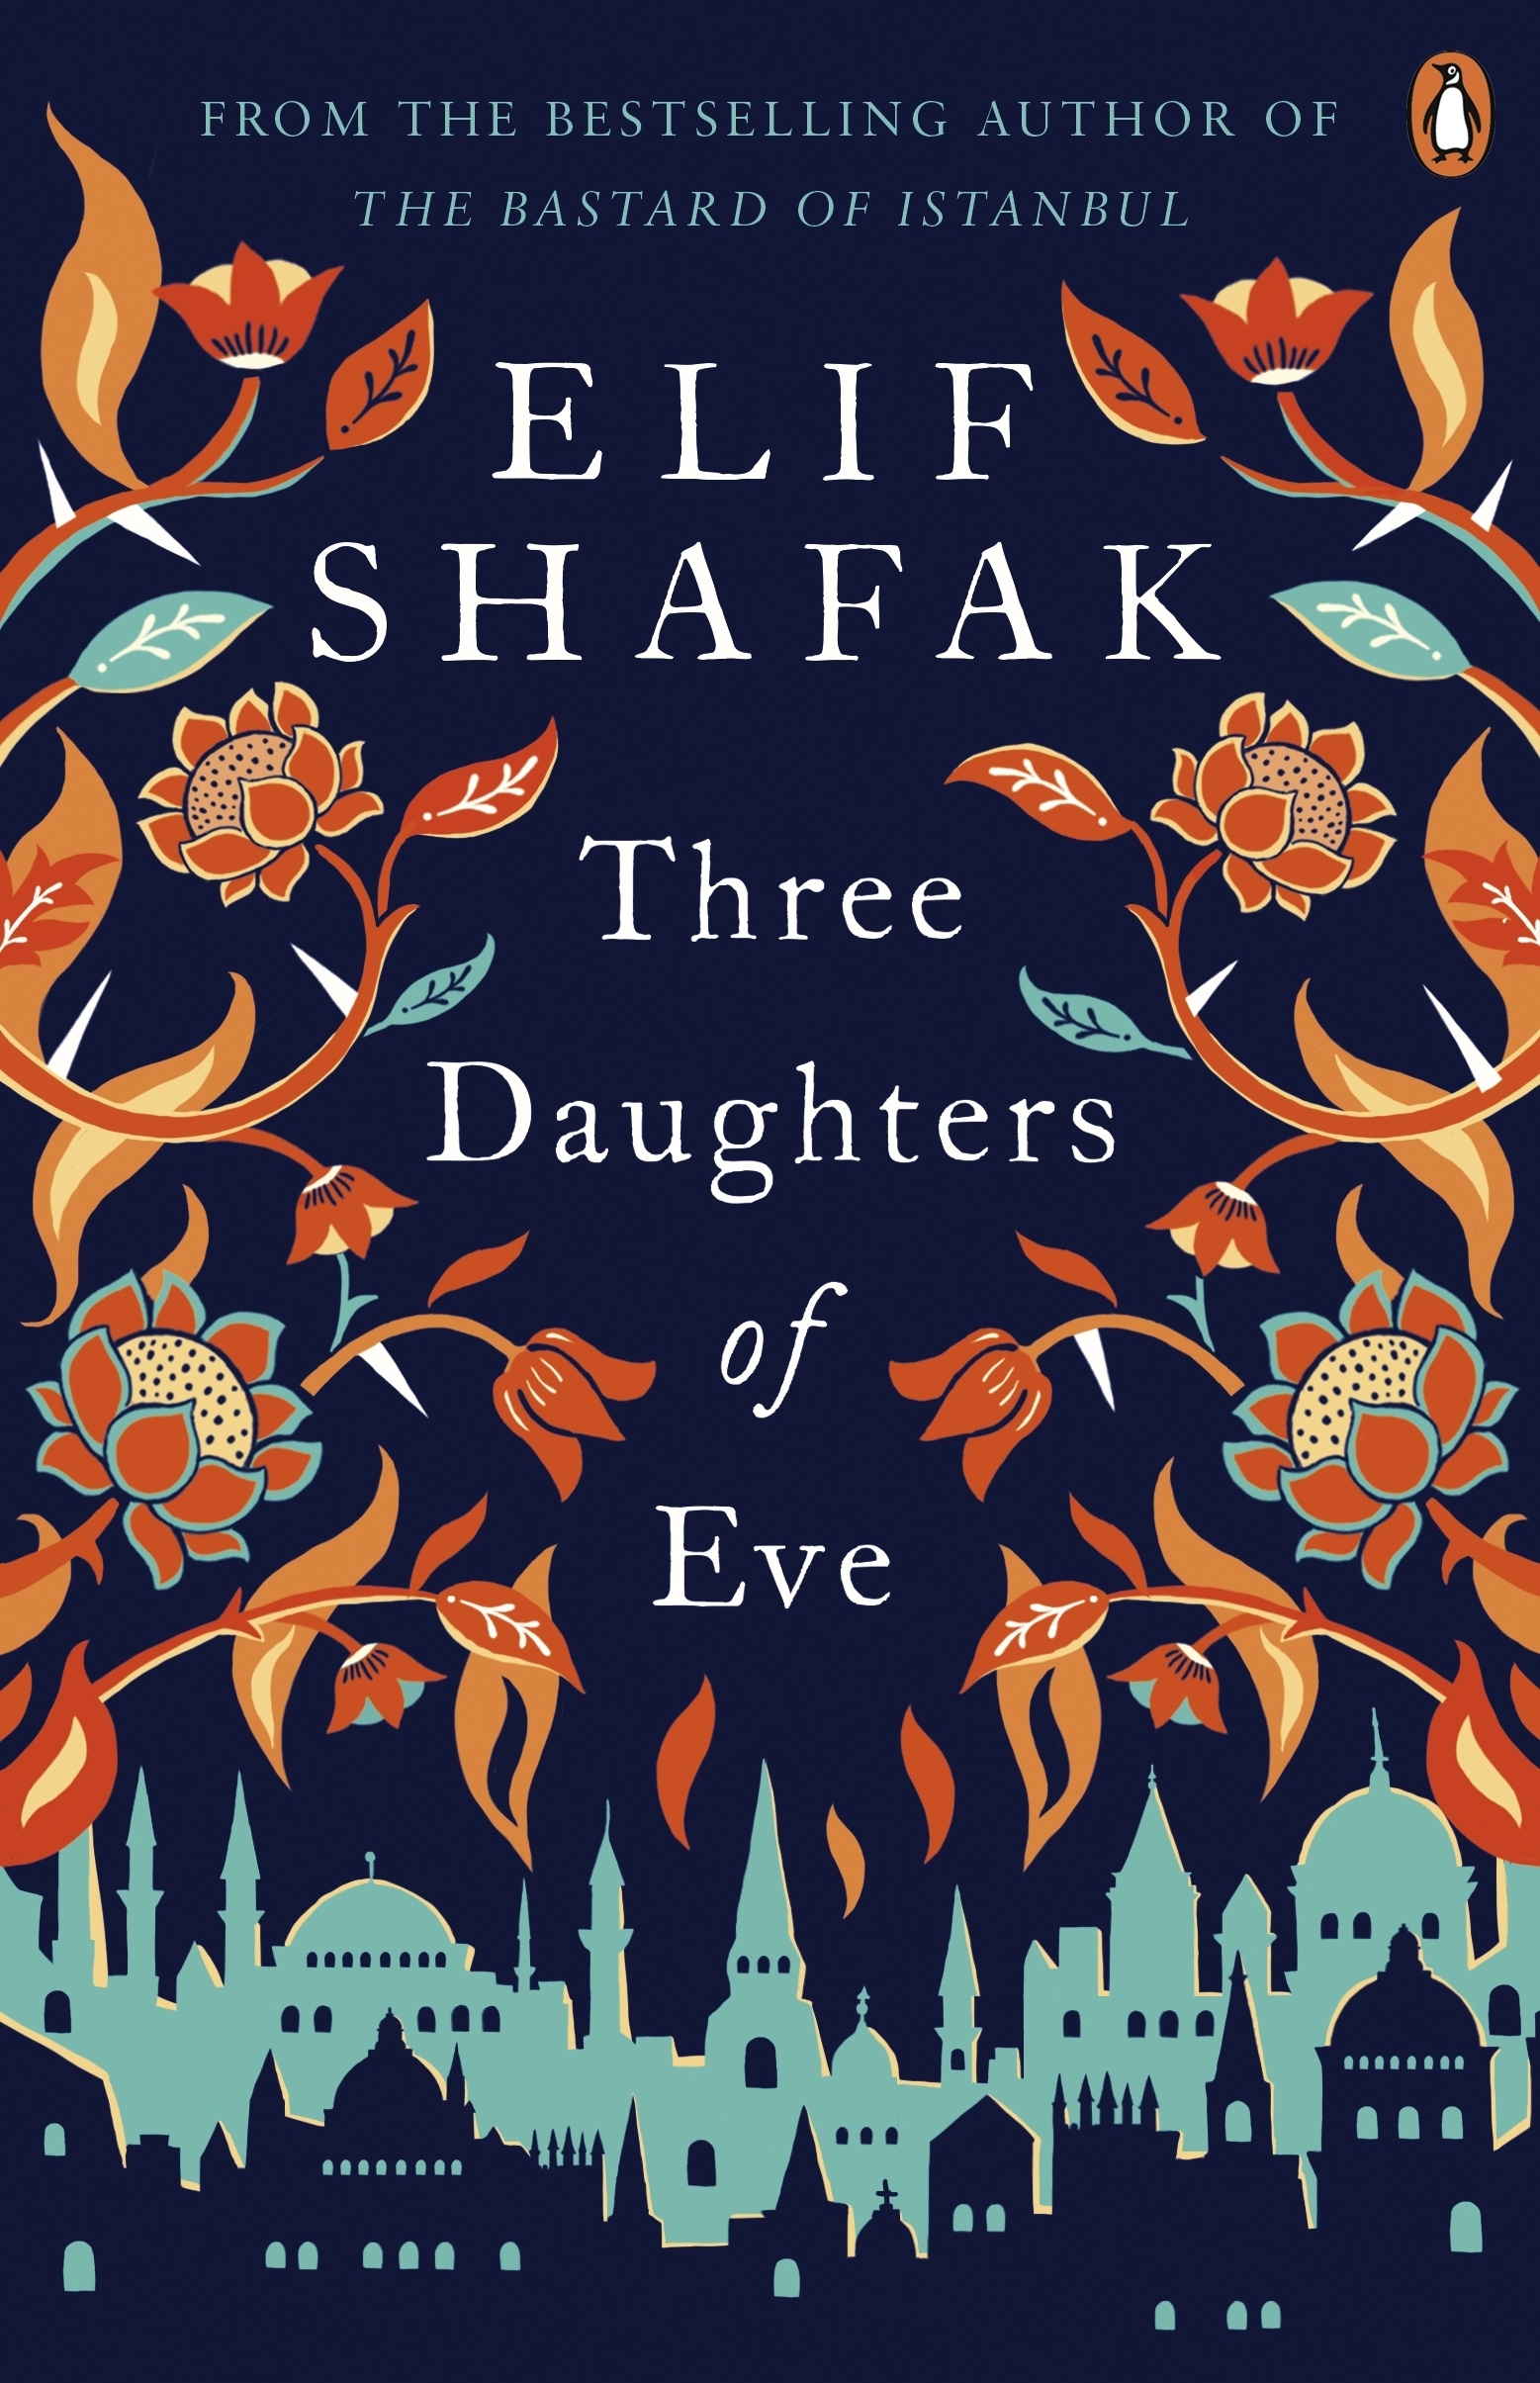 Three Daughter of Eve by Elif Shafak